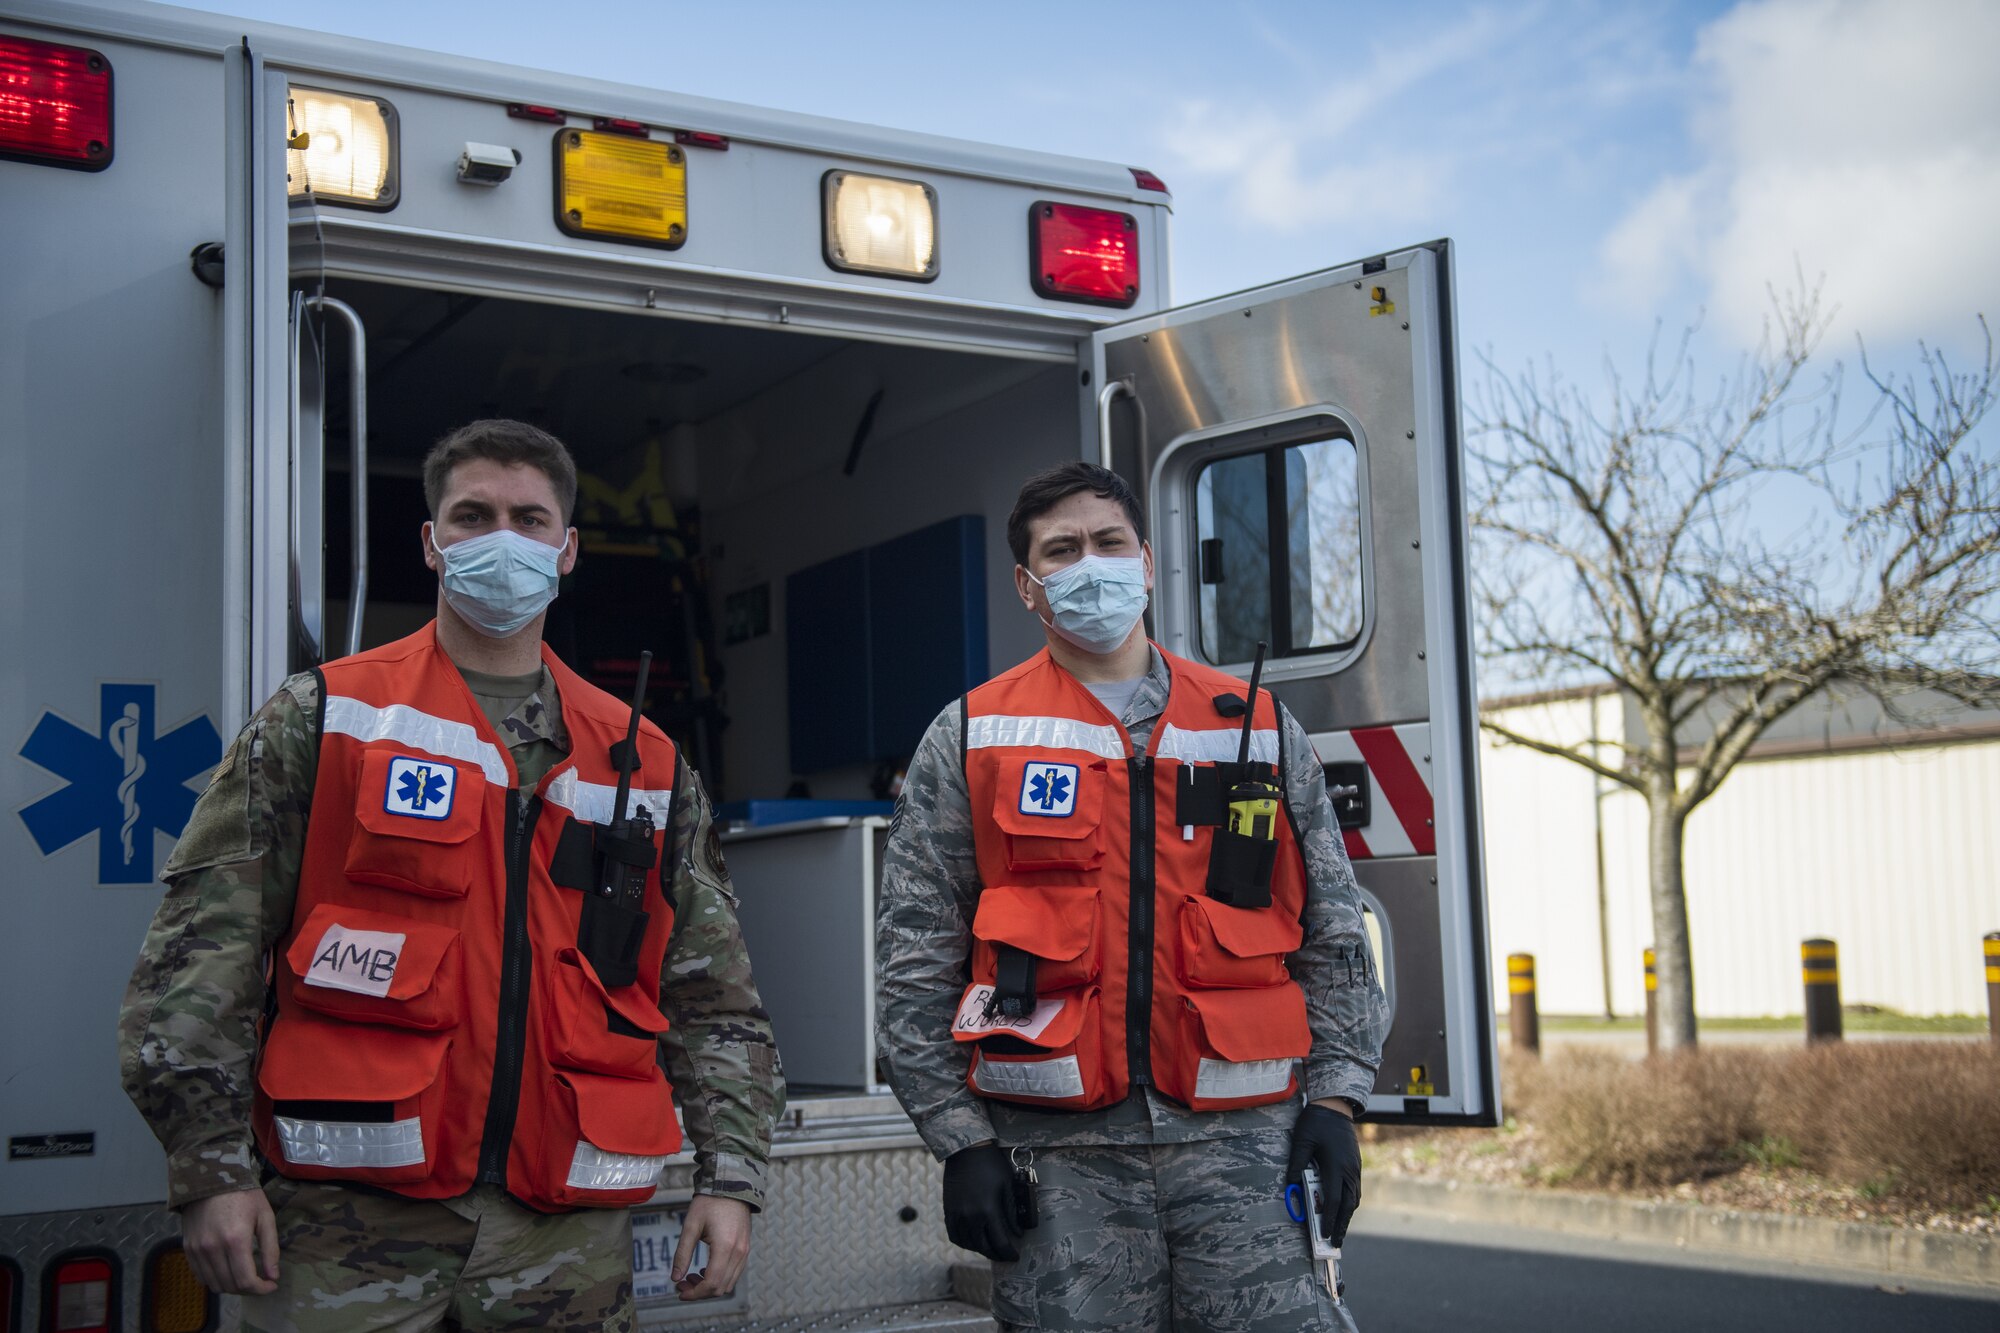 Two U.S. Air Force 52nd Medical Group ambulatory services Airmen pose for a photo near an ambulance at Spangdahlem Air Base, Germany, March 26, 2021. During exercise Ready EAGLE, ambulatory services dispatched to the scene of a simulated disaster at the base theater. (U.S. Air Force photo by Senior Airman Ali Stewart)